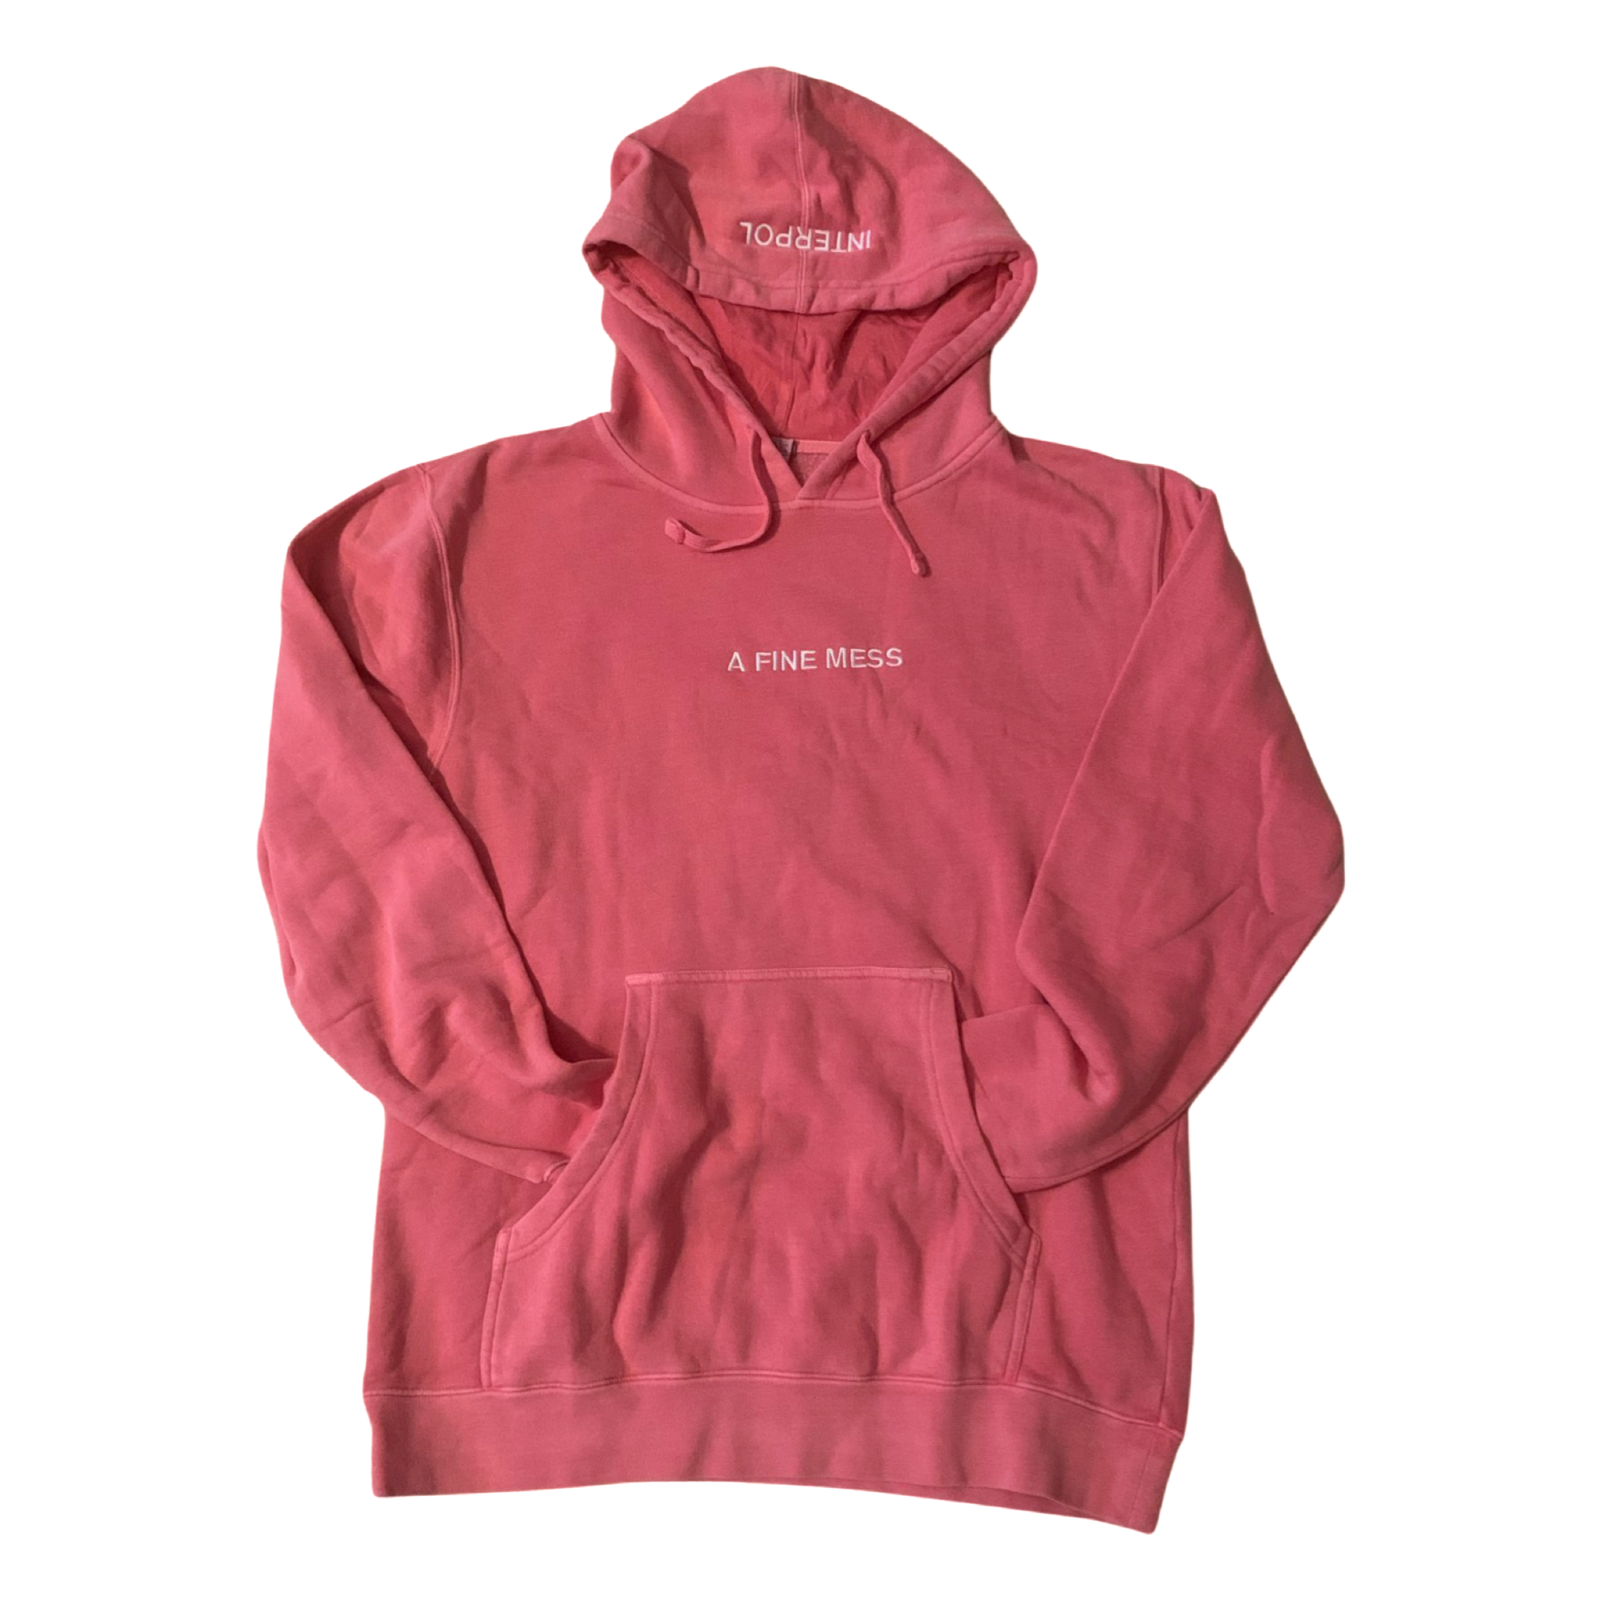 Primary image for Interpol A Fine Mess Washed Pink embroidered Pullover Hoodie Sweatshirt Unisex